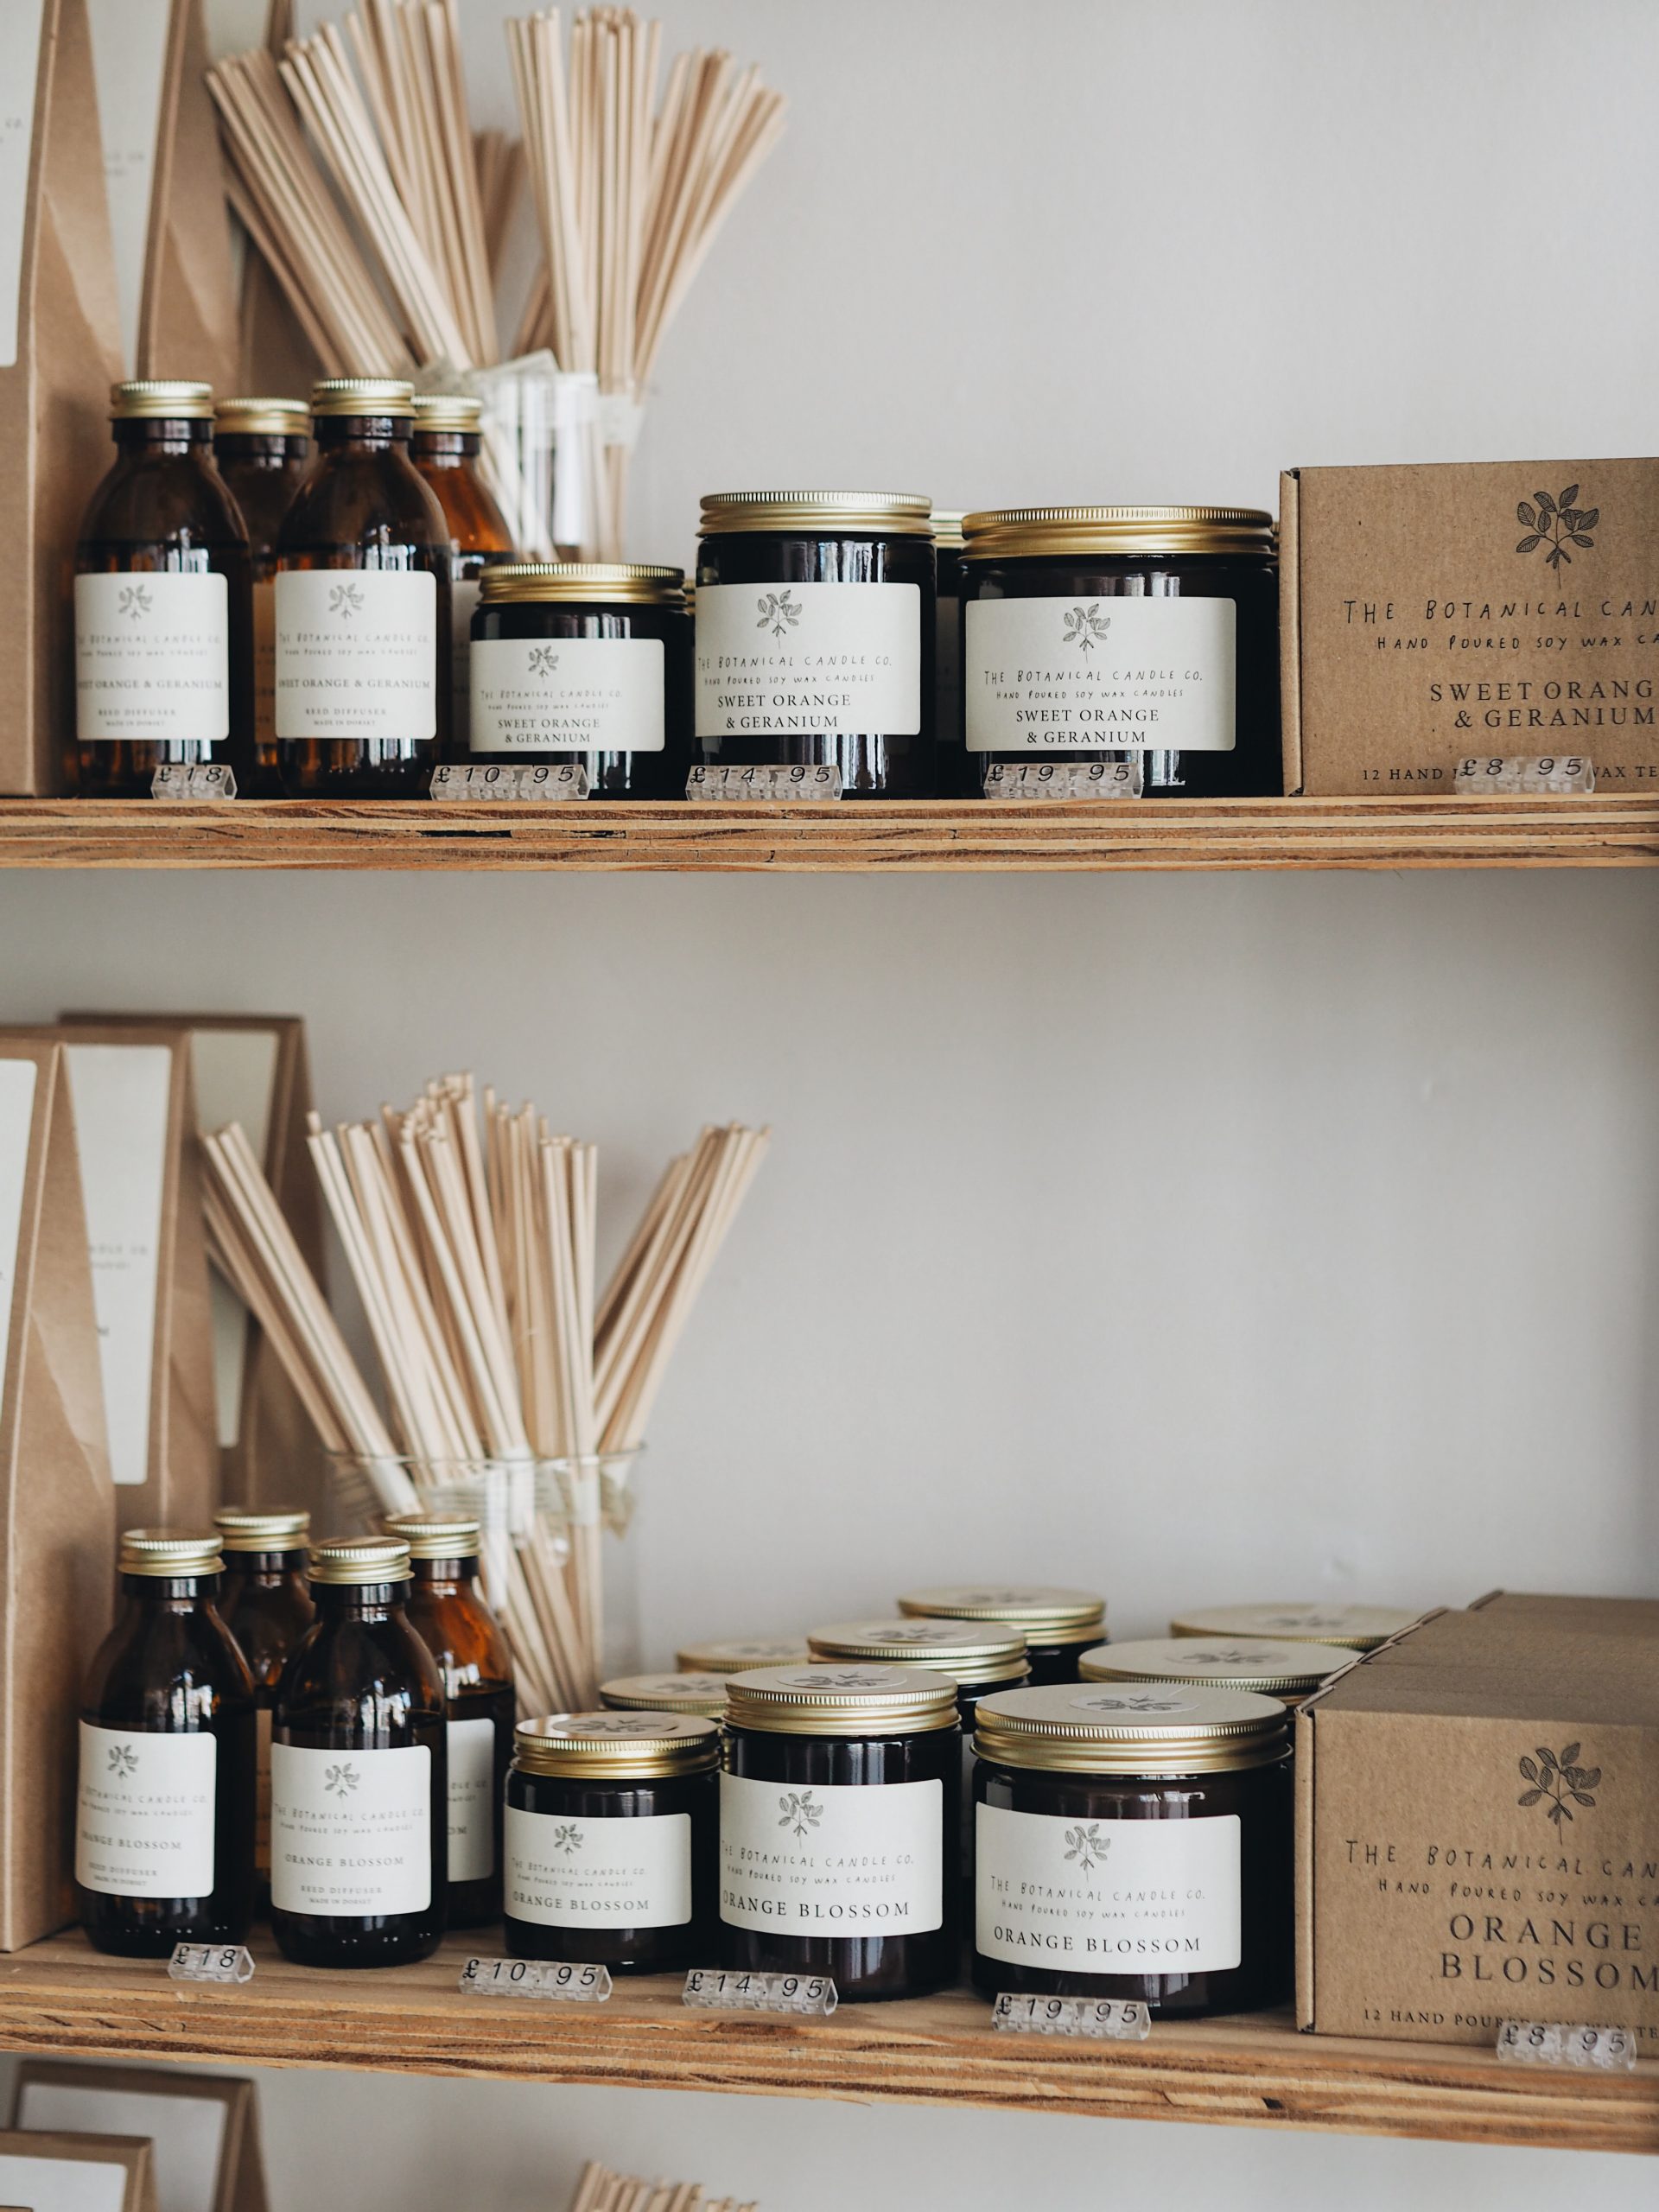 Handmade British candles inside The Botanical Candle Co. in Shaftesbury, Dorset